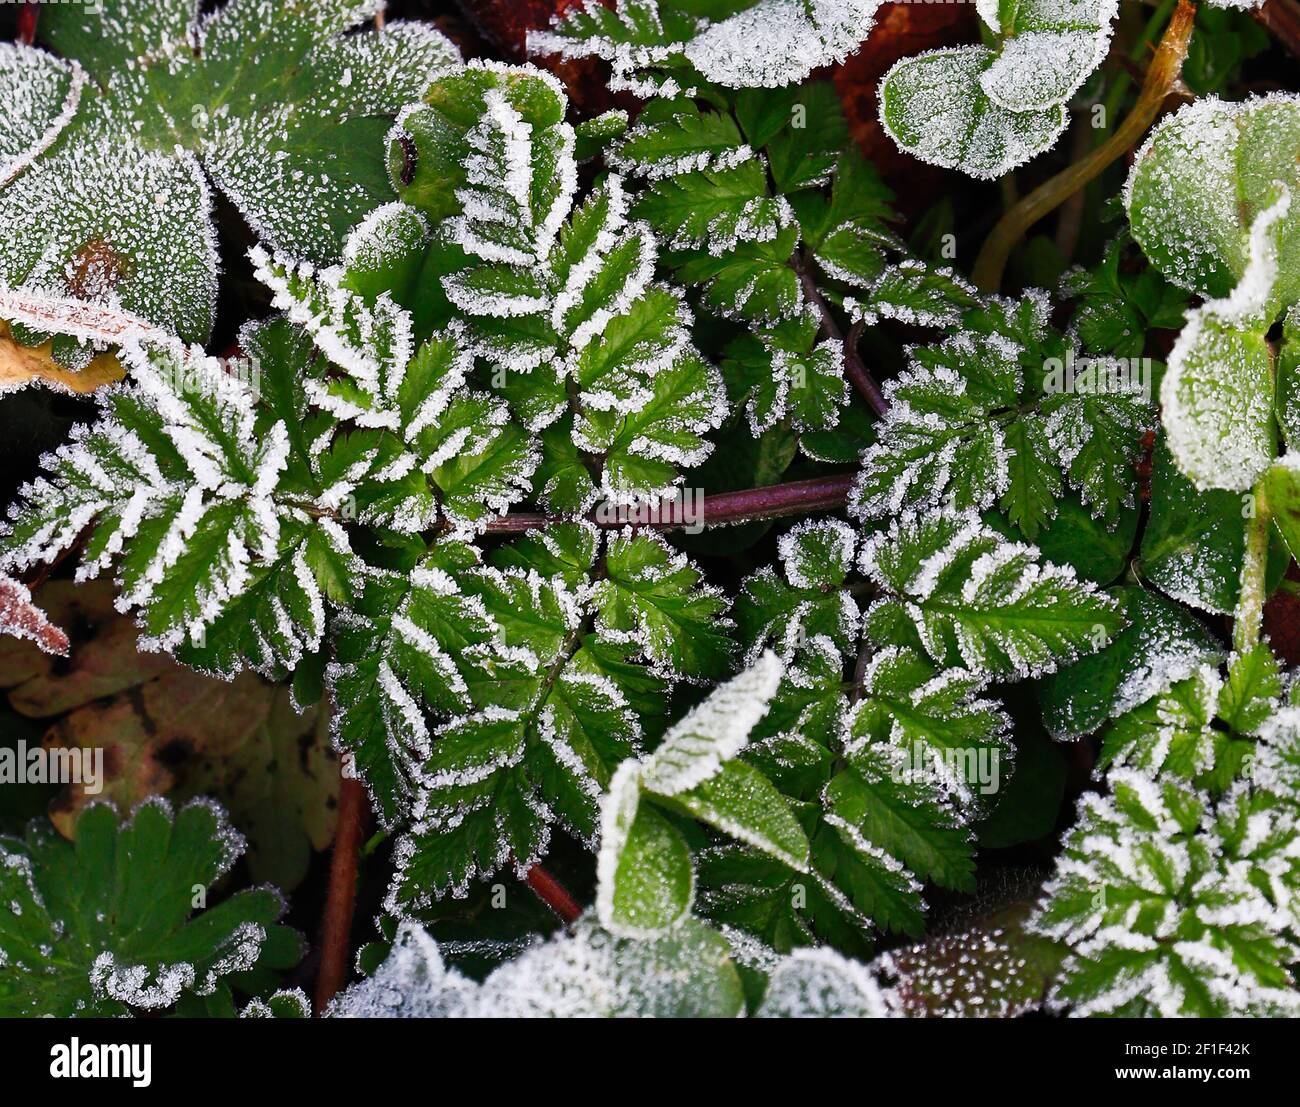 Frosty leaves closeup with ice crystals Stock Photo